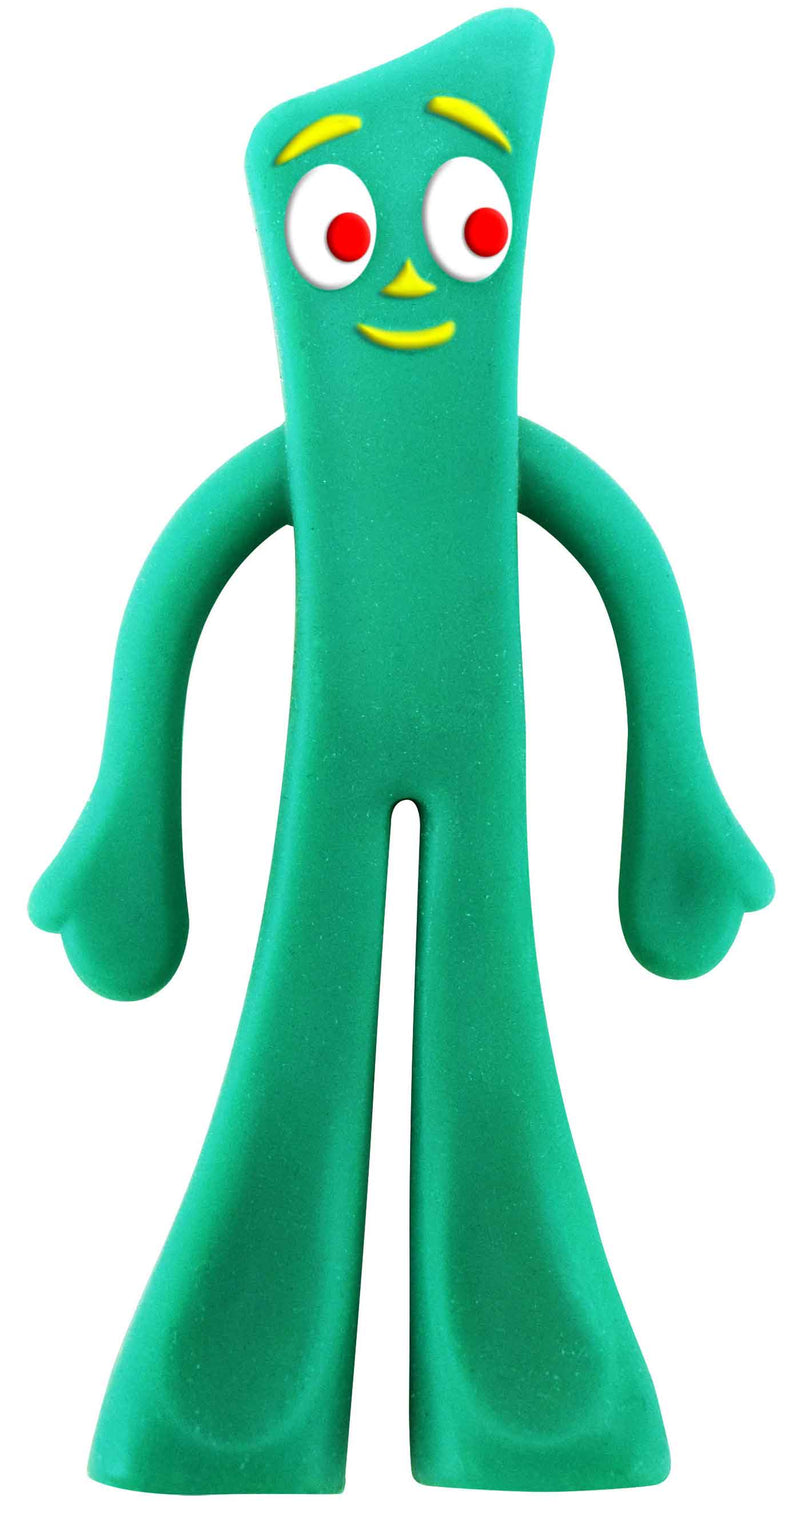 World's Smallest - Stretch Gumby open